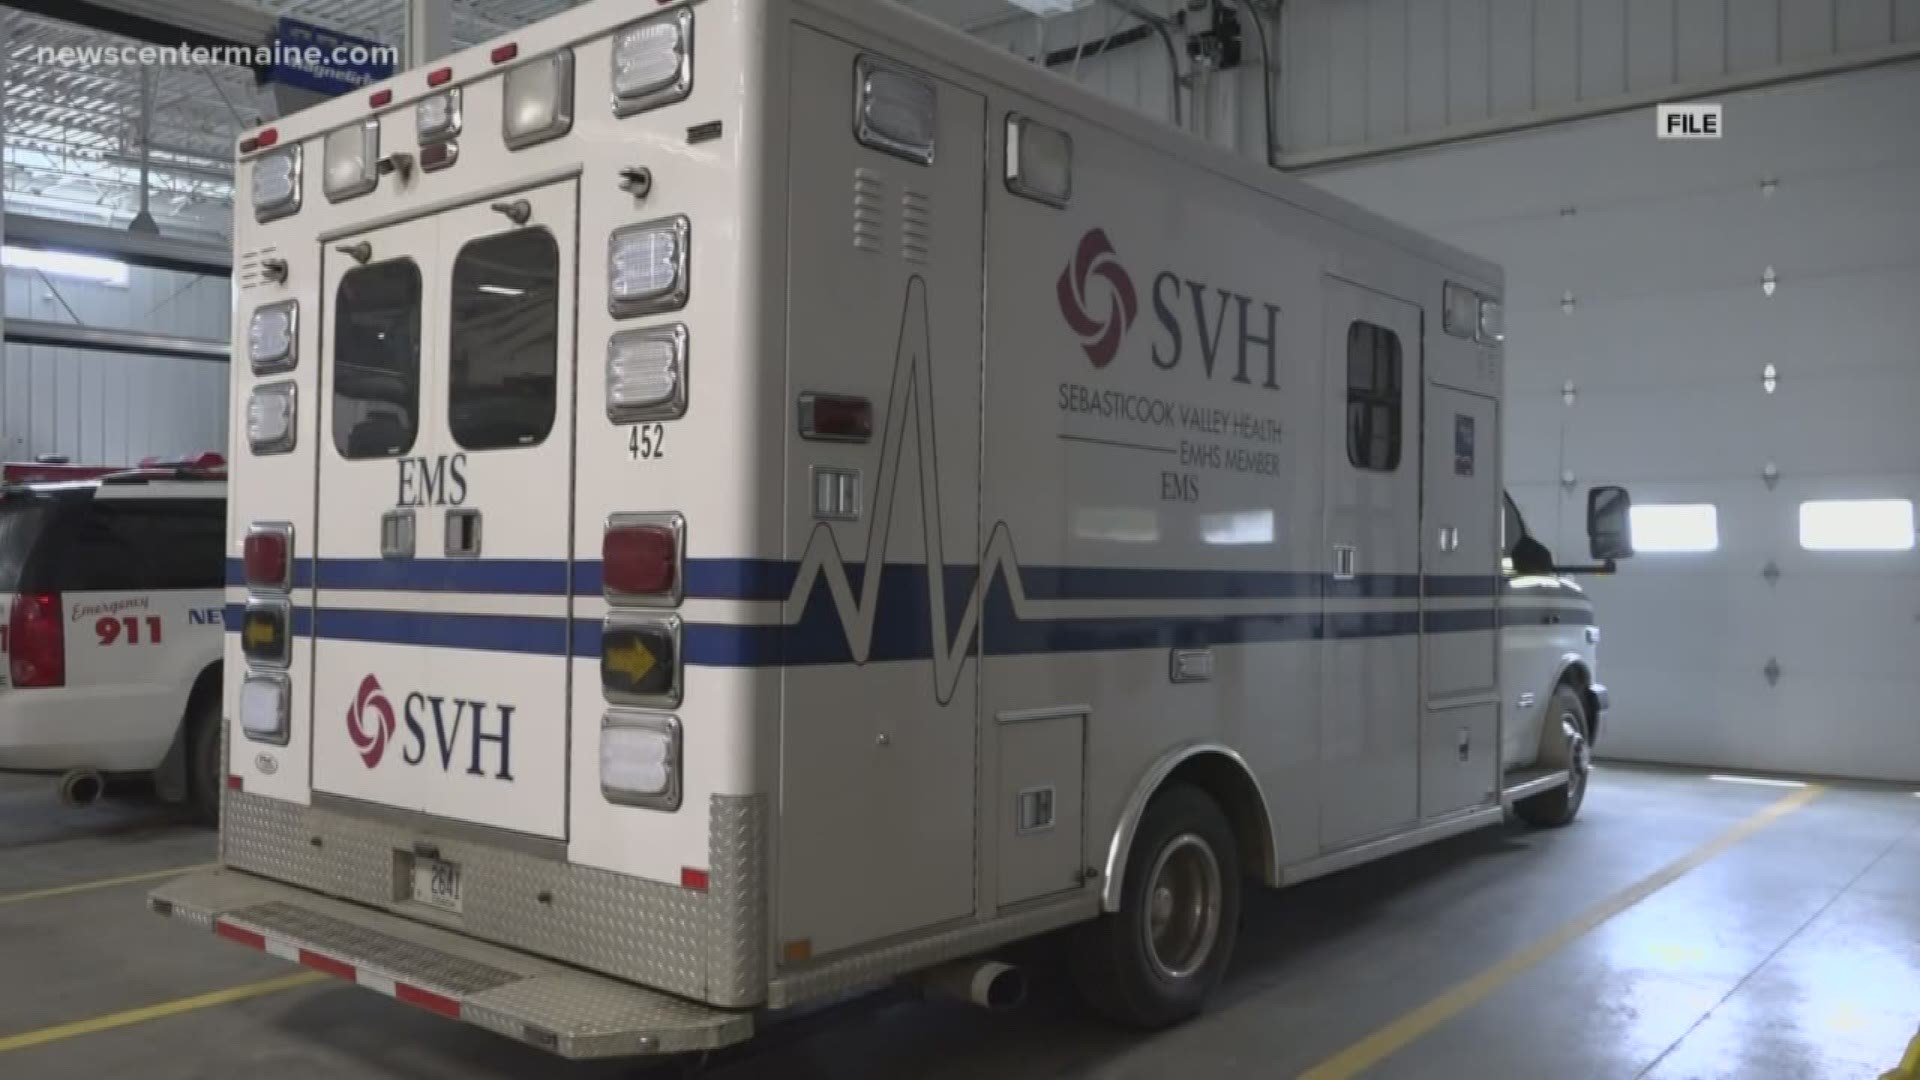 A bill before the legislature would allow town-run ambulance services to fill the need in rural communities.